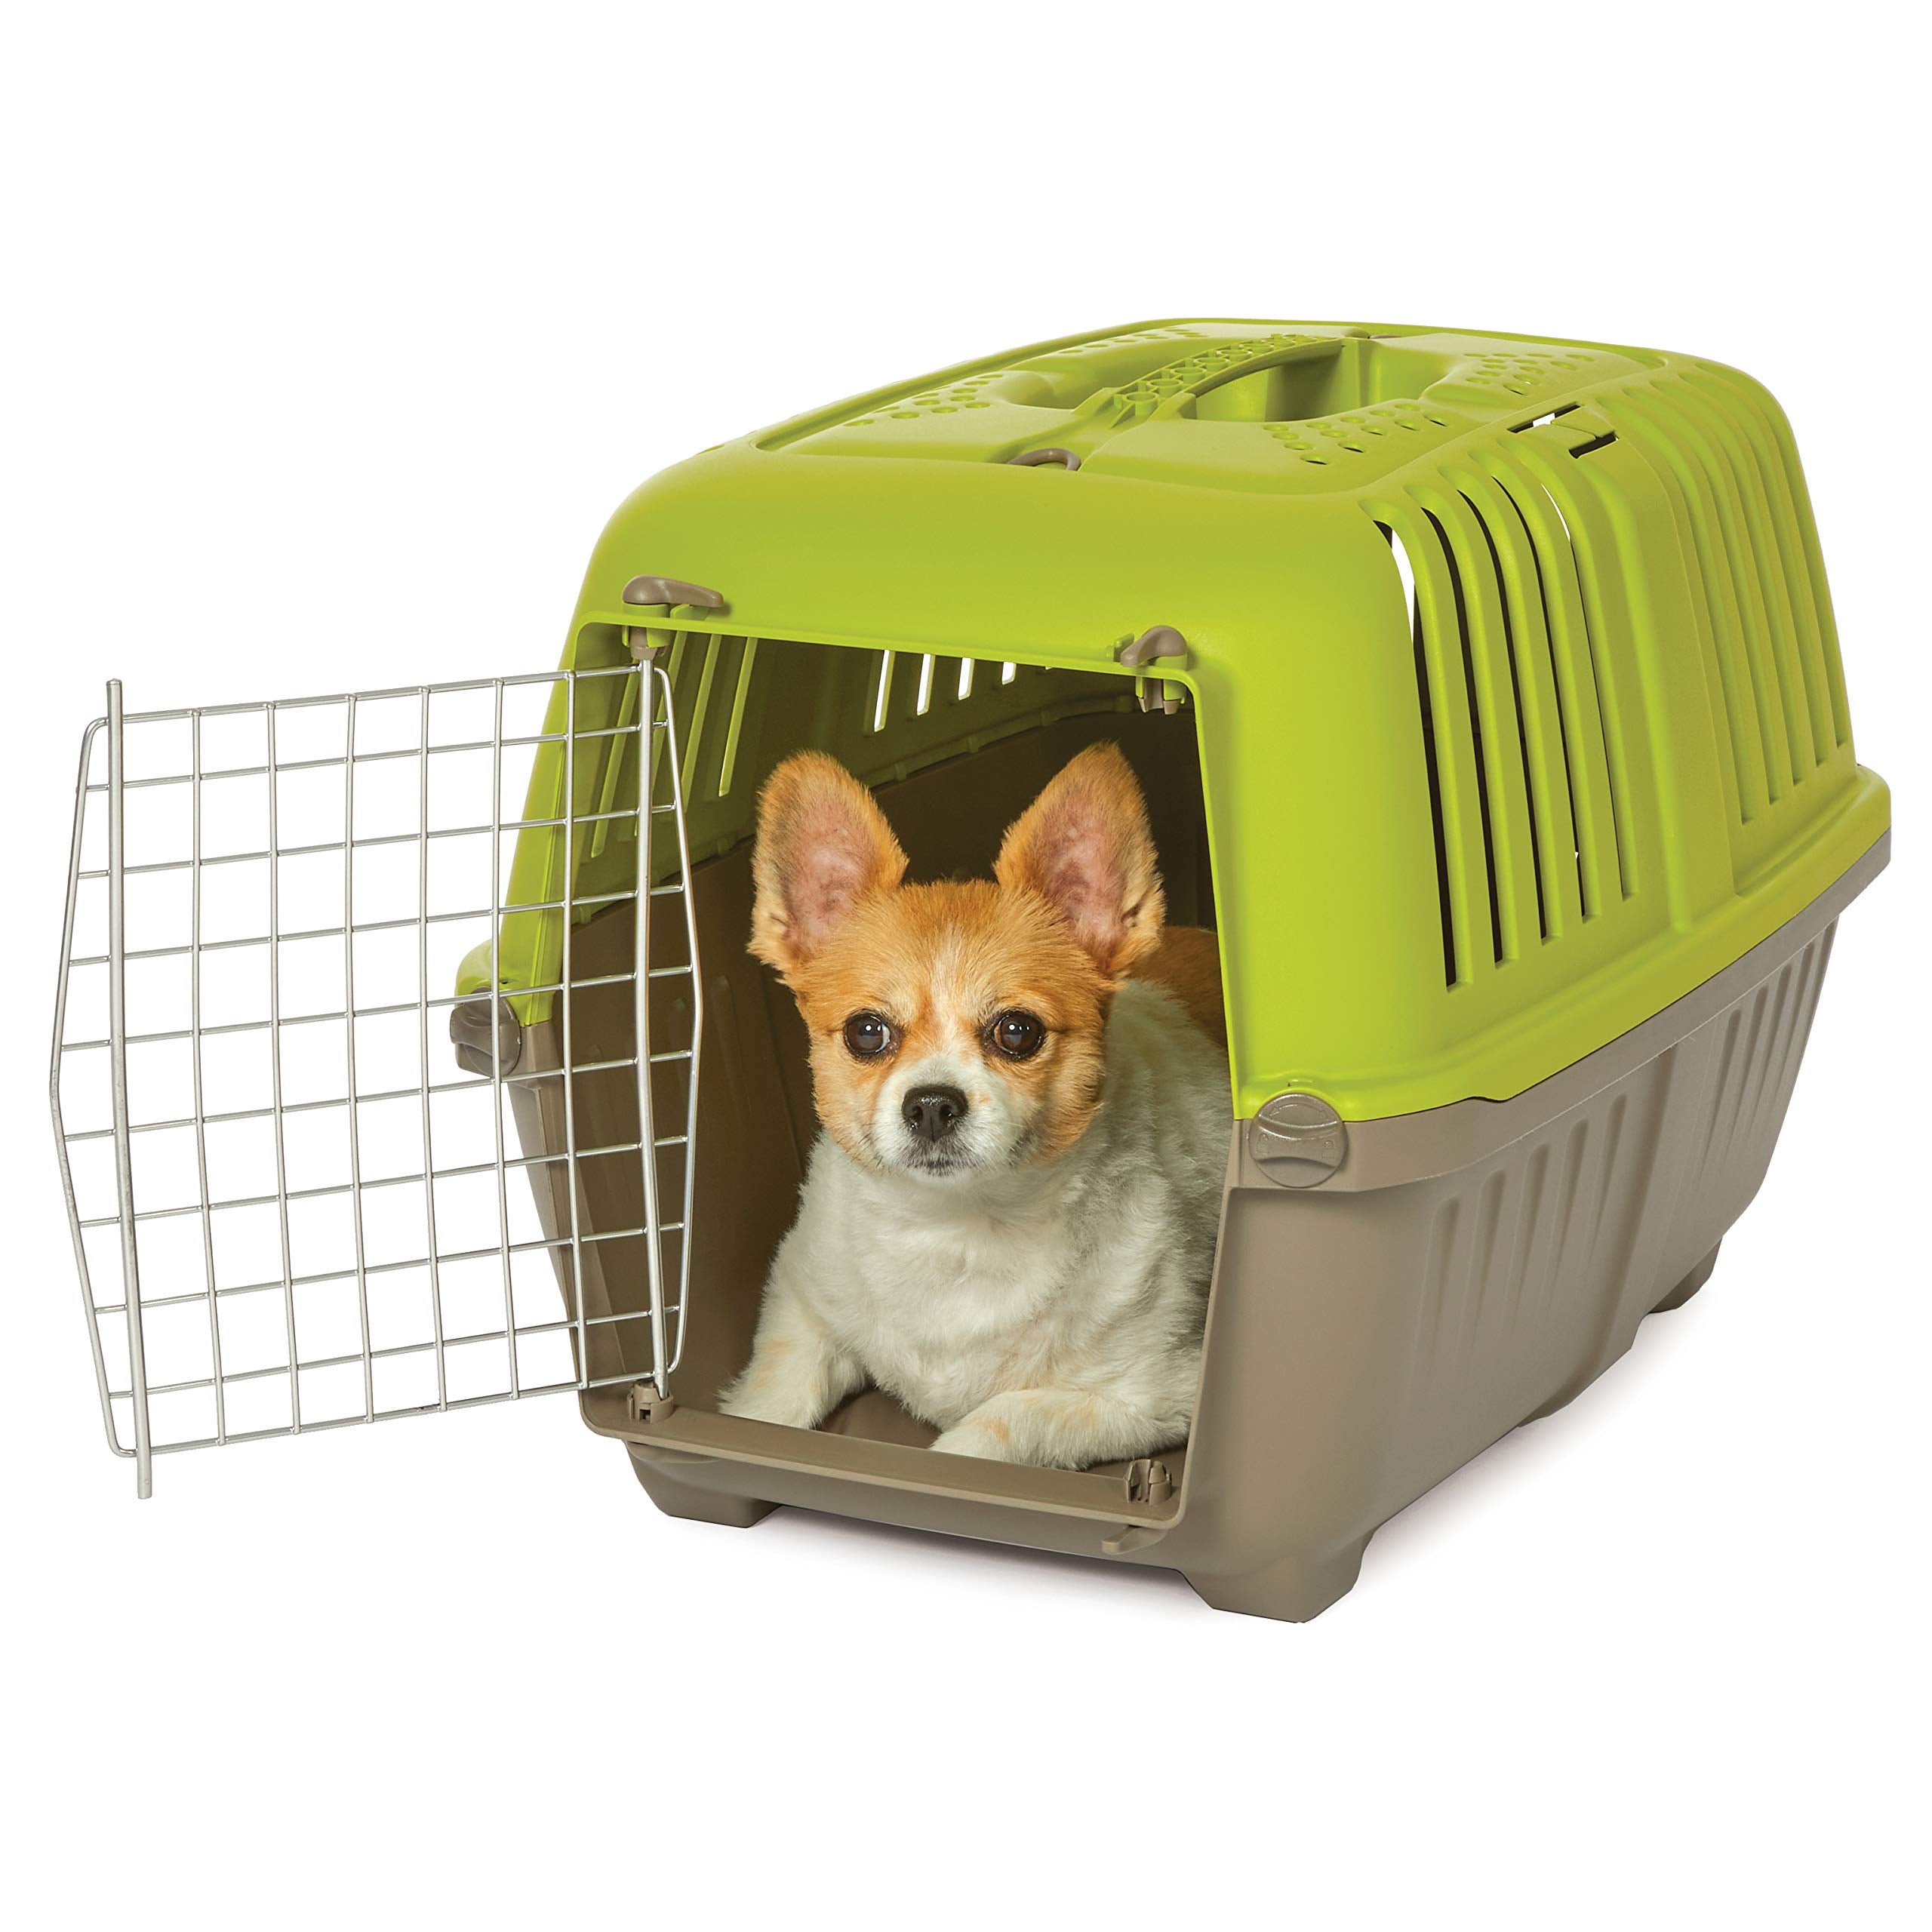 Midwest Spree Hard-Sided Travel Cat and Dog Kennel Carrier - Green - 24